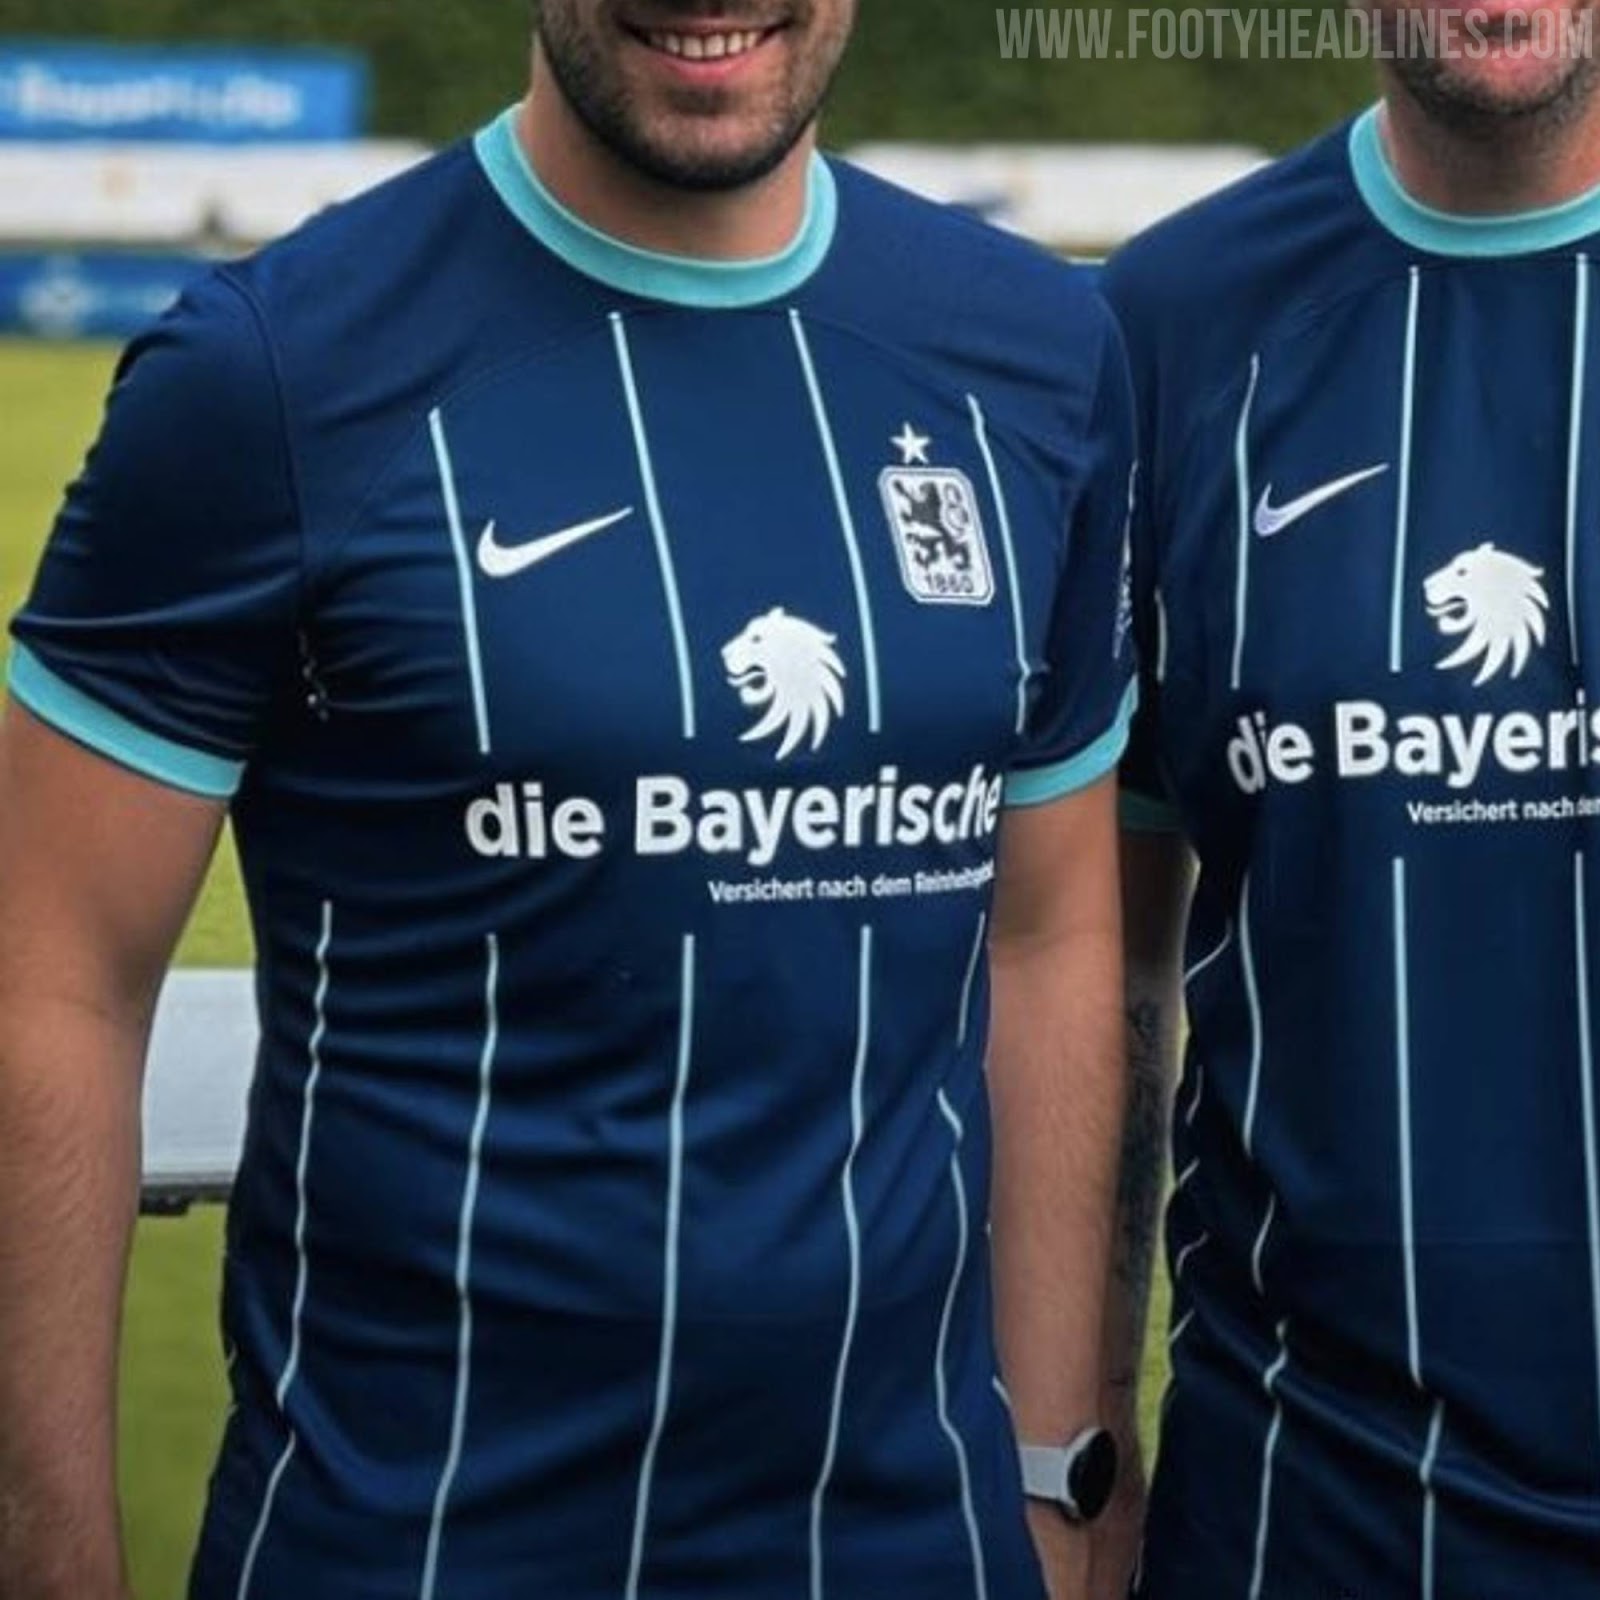 1860 München 2023-24 Nike Home Kit - Football Shirt Culture - Latest  Football Kit News and More